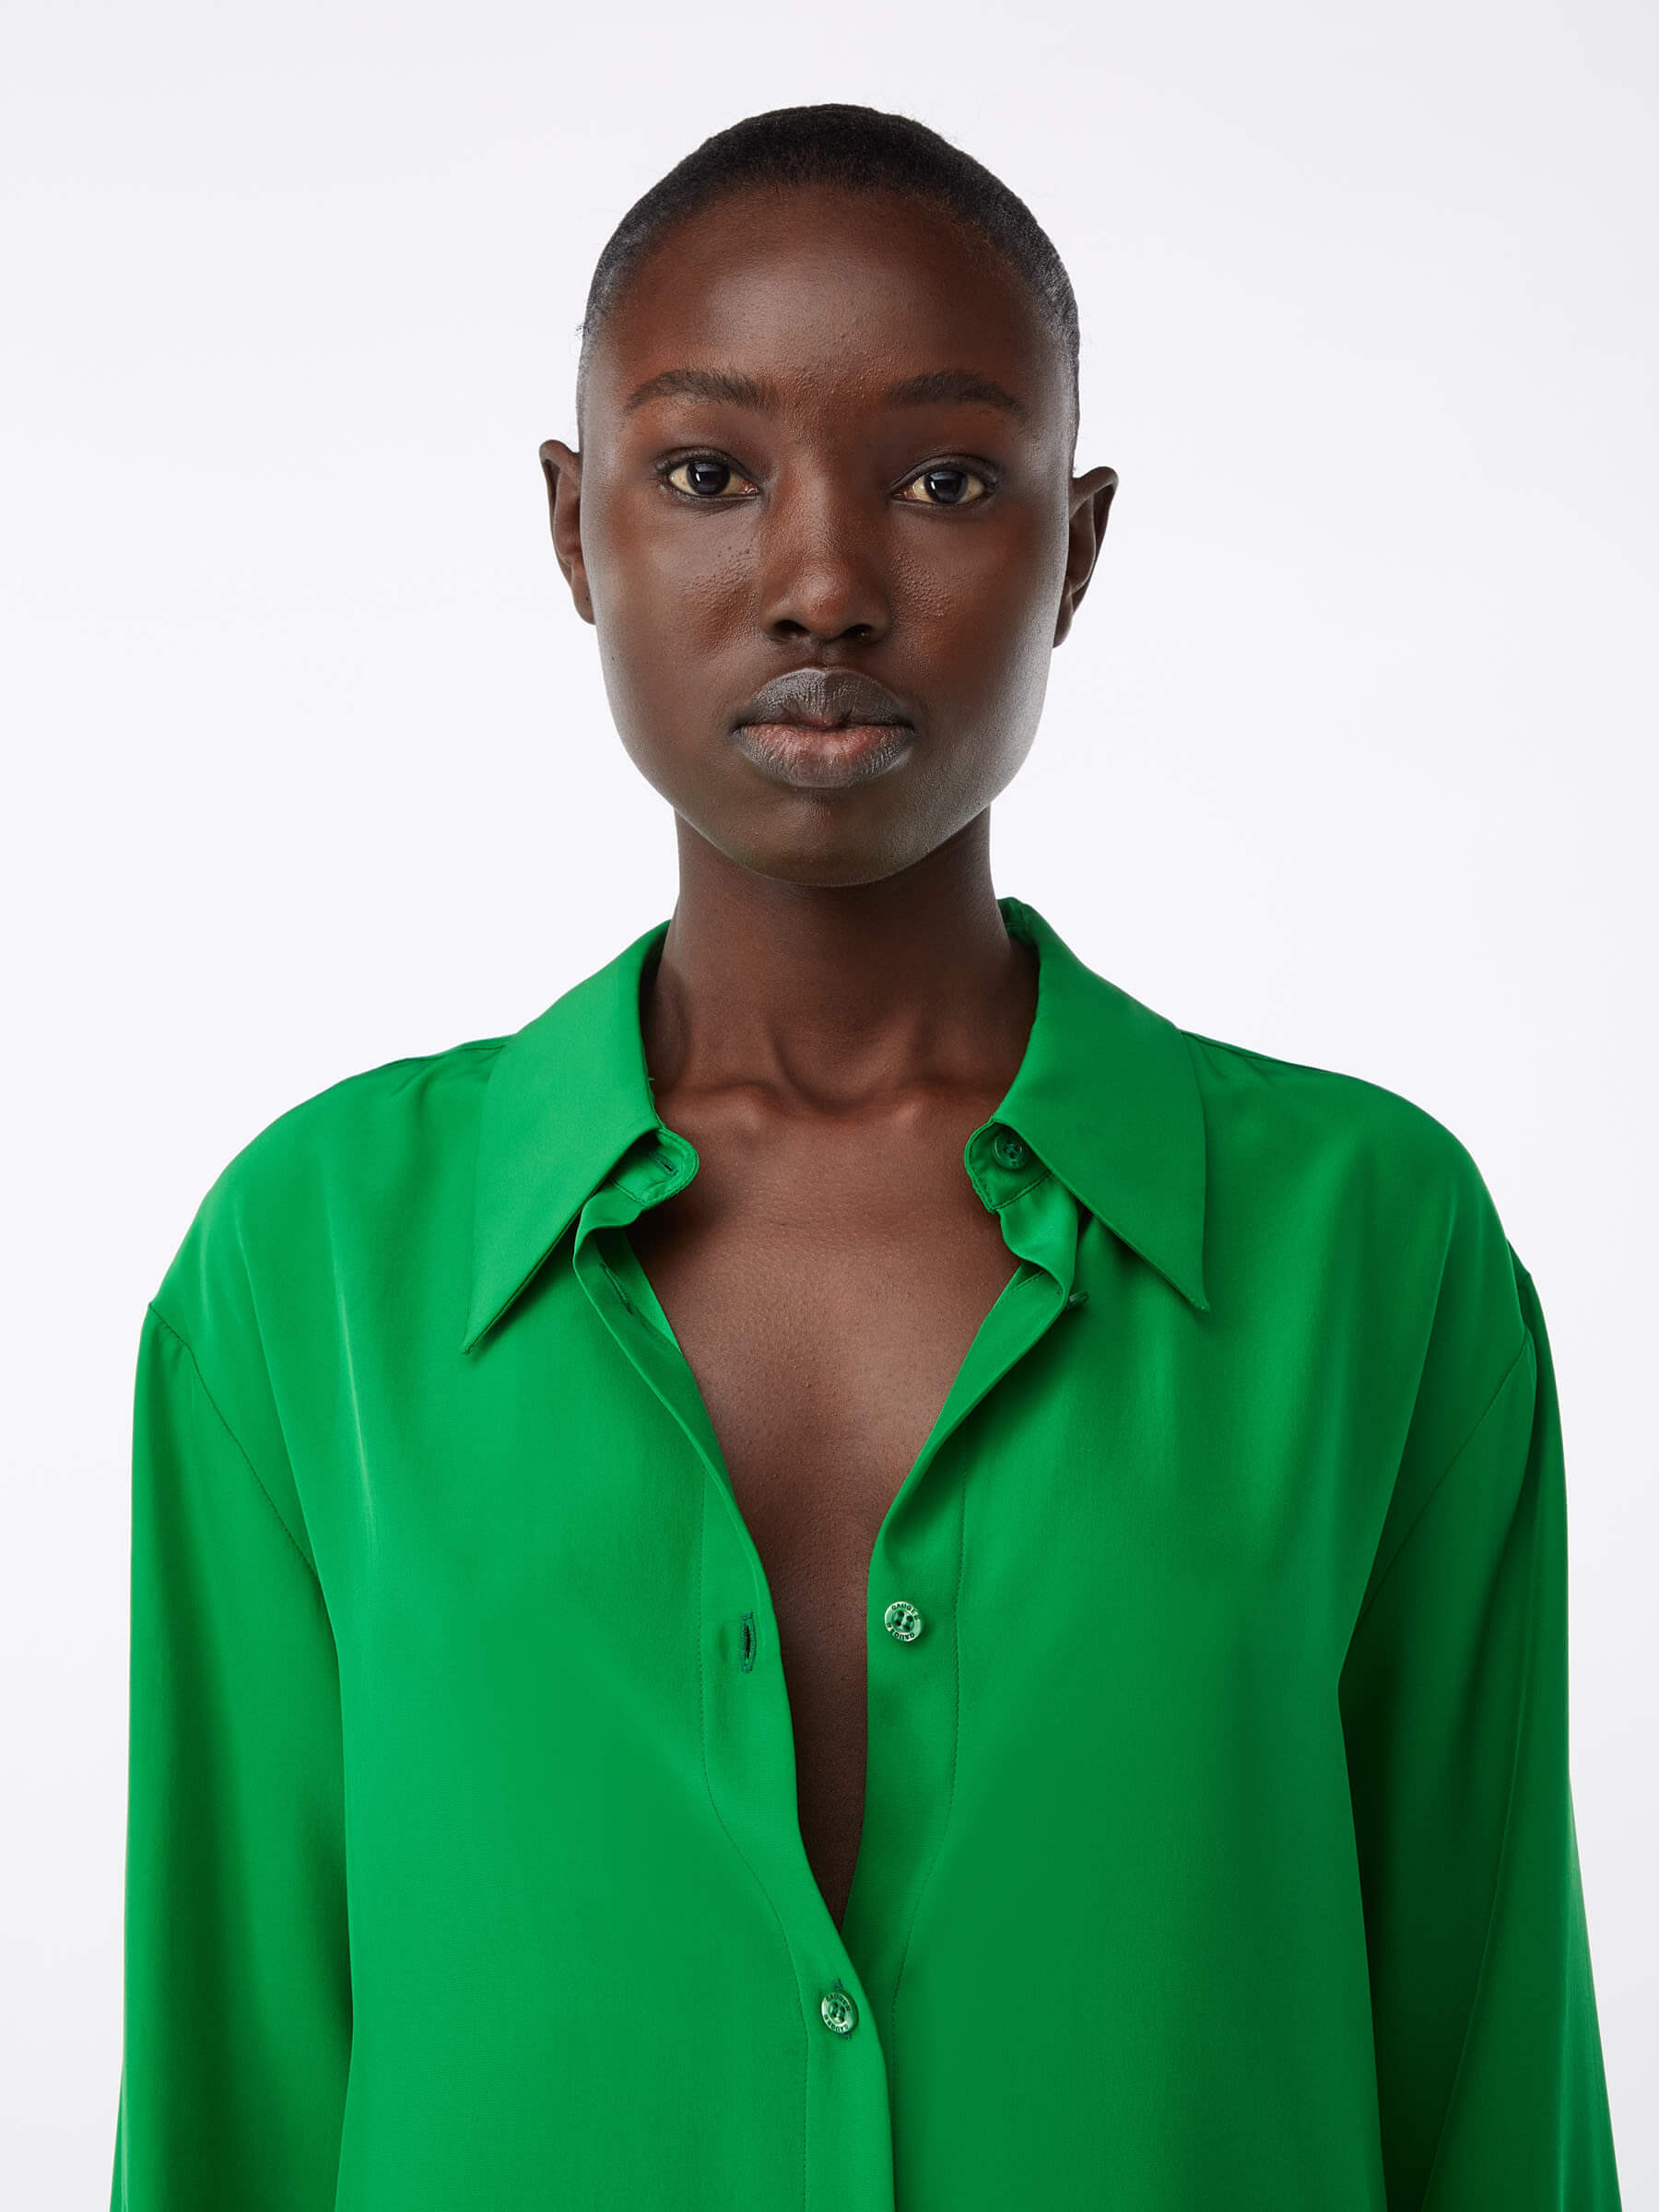 Gauge81 Okayi Shirt in Jungle available at The New Trend